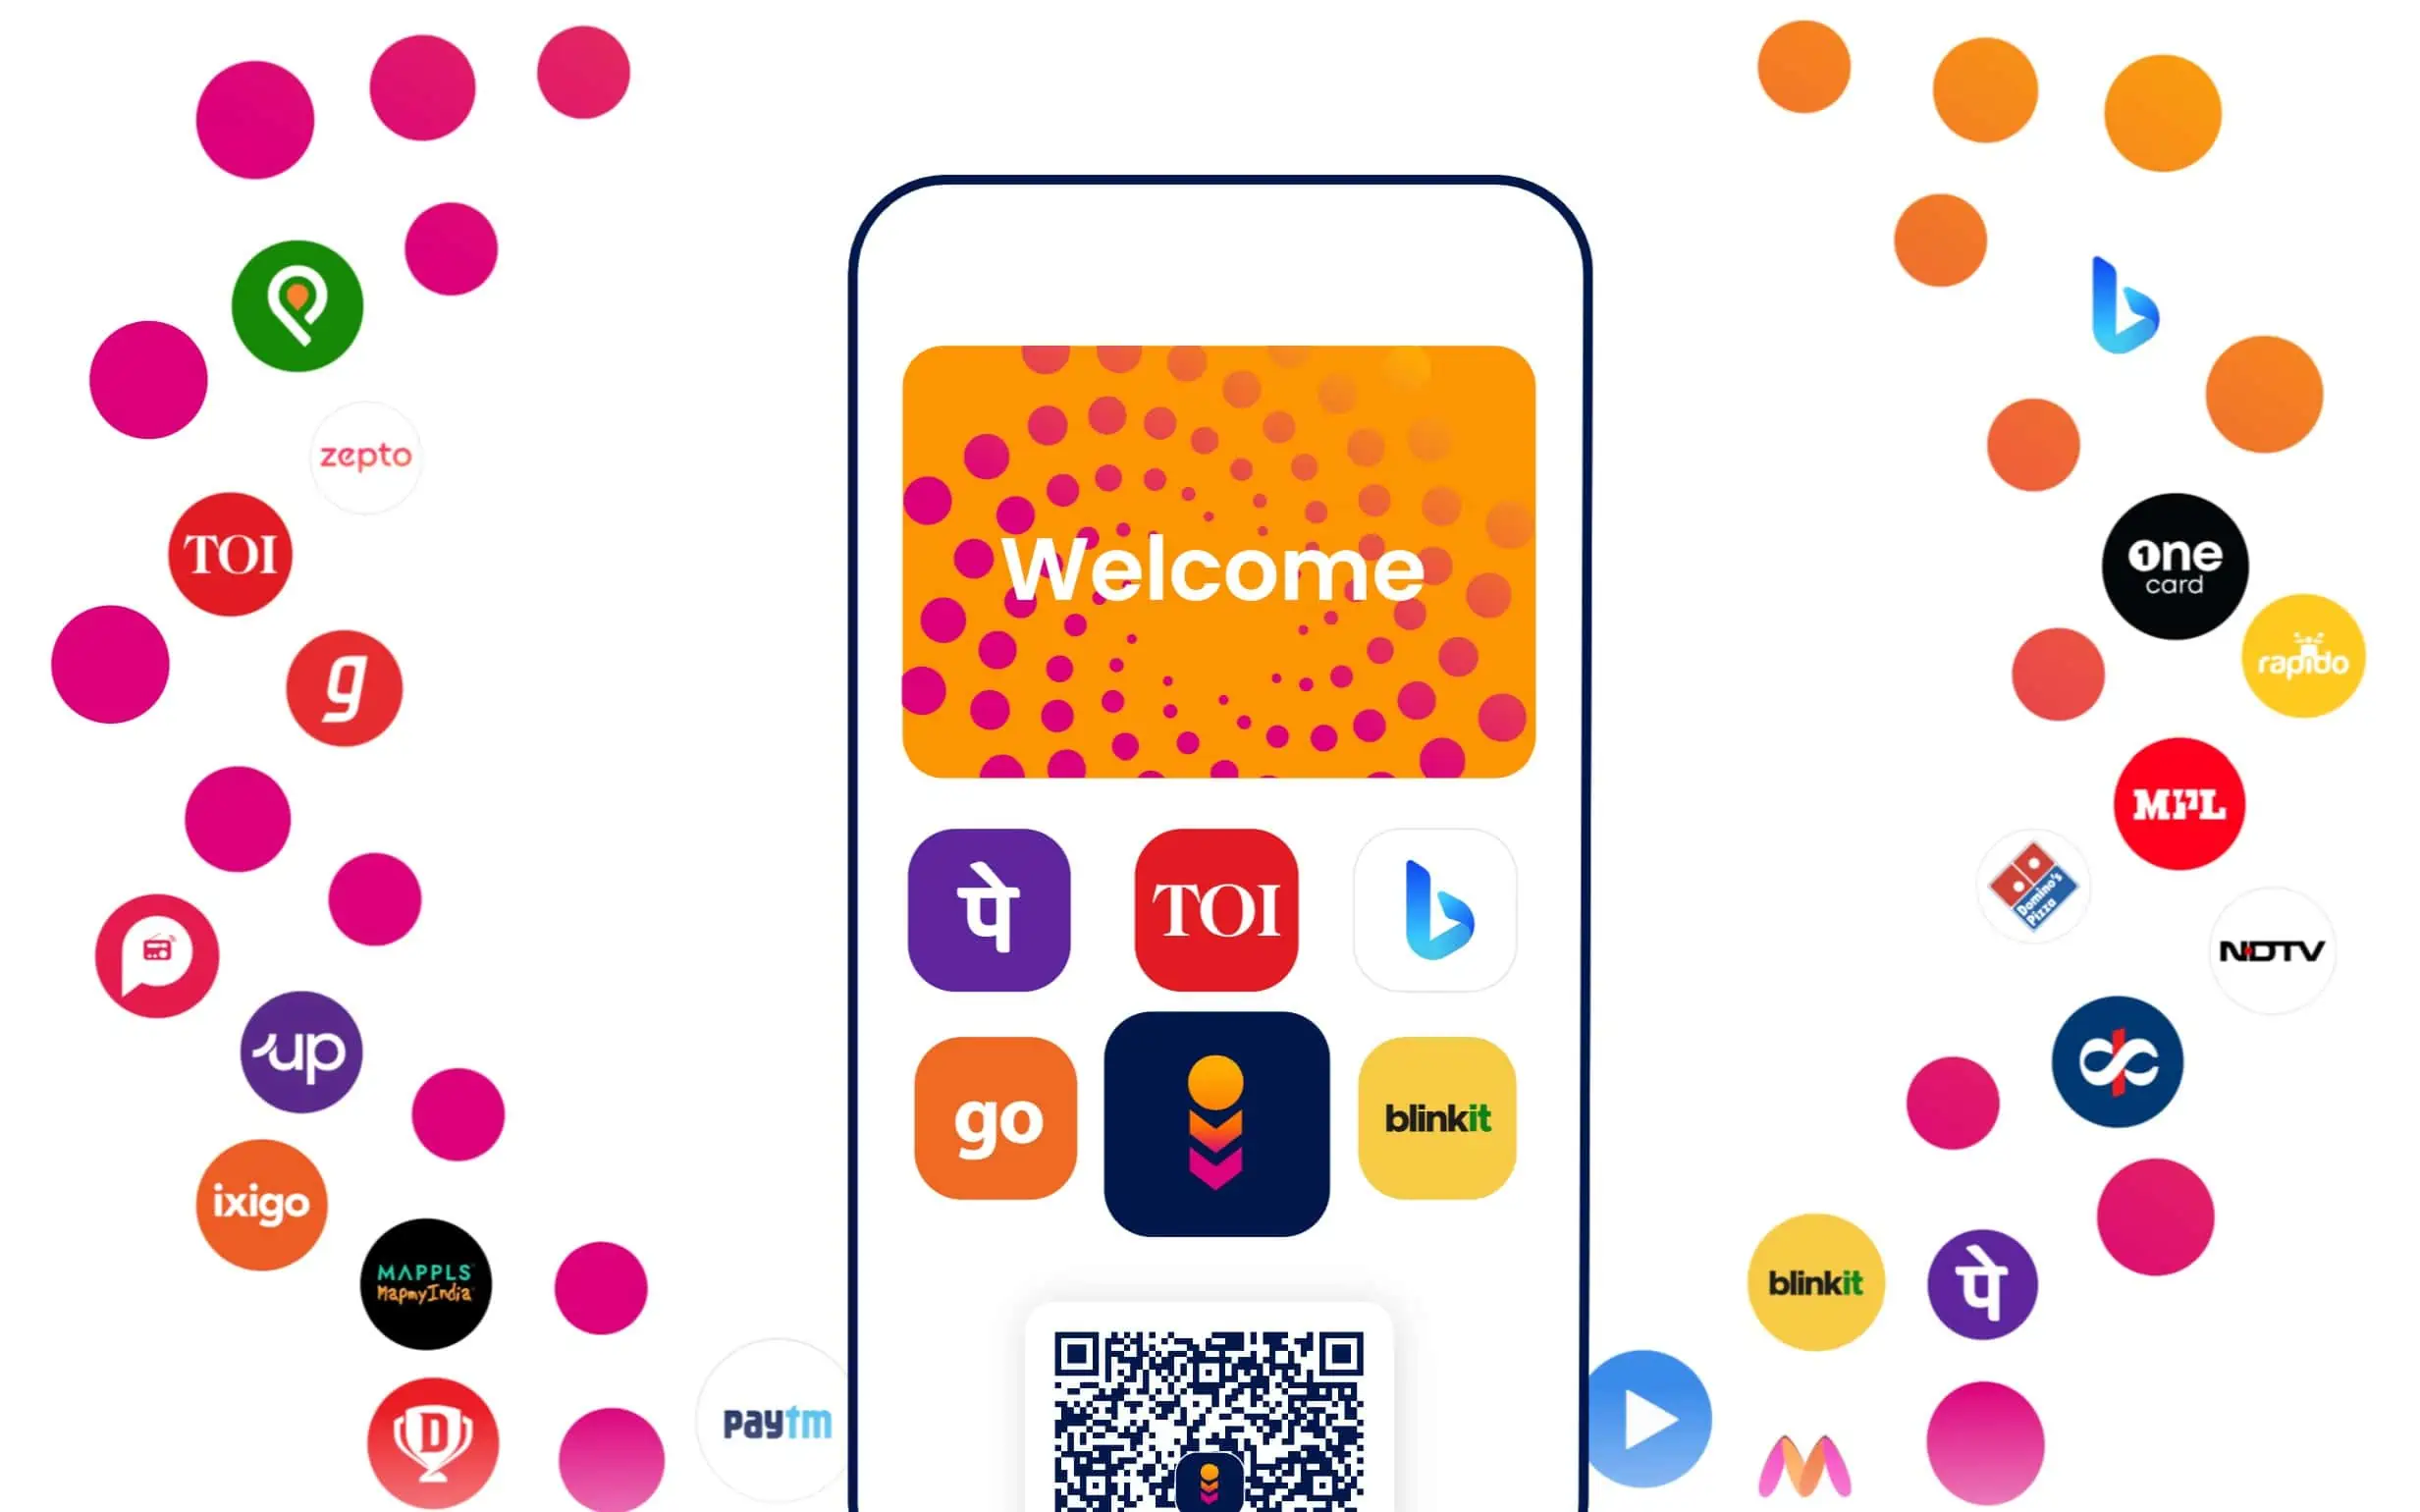 PhonePe launches Indus Appstore, challenging Google Play Store dominance in India